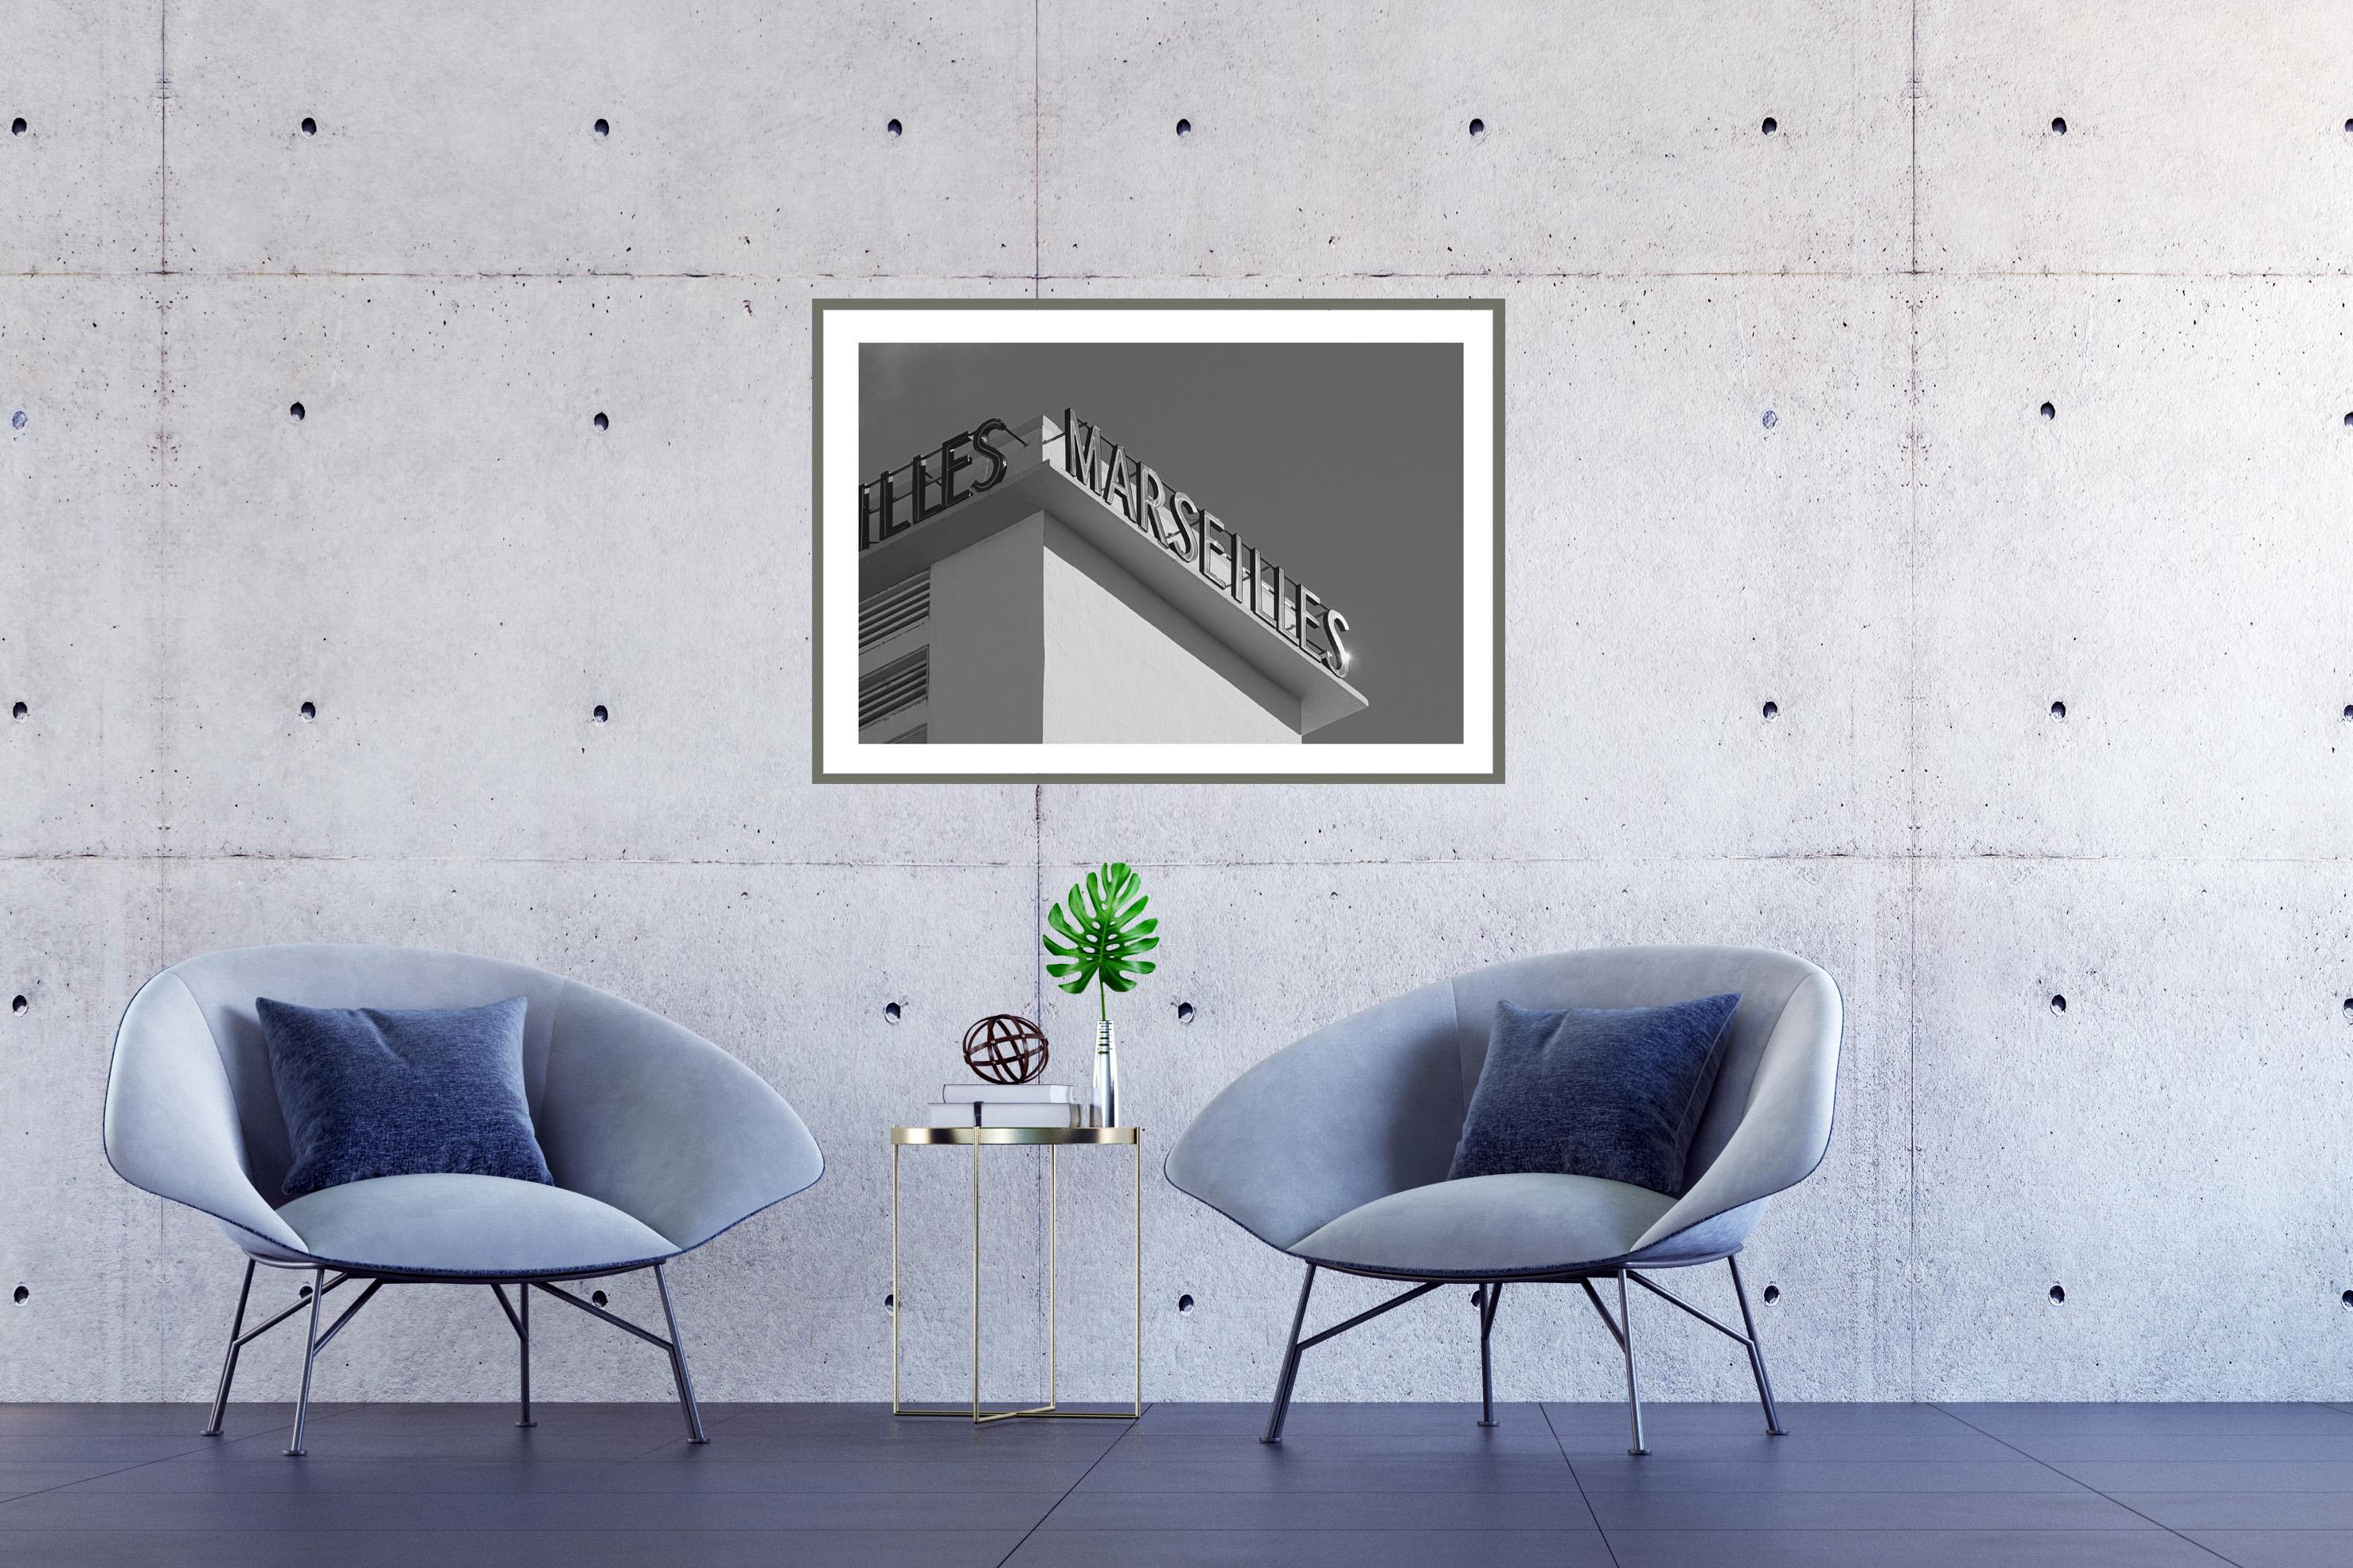 This is an exclusive limited edition black and white Giclée print, on 100% cotton Hahnemühle Photo Rag Fine Art matte paper.

This series of black and white photographs capture stunning minimalist Art Deco buildings in Miami Beach. The building's